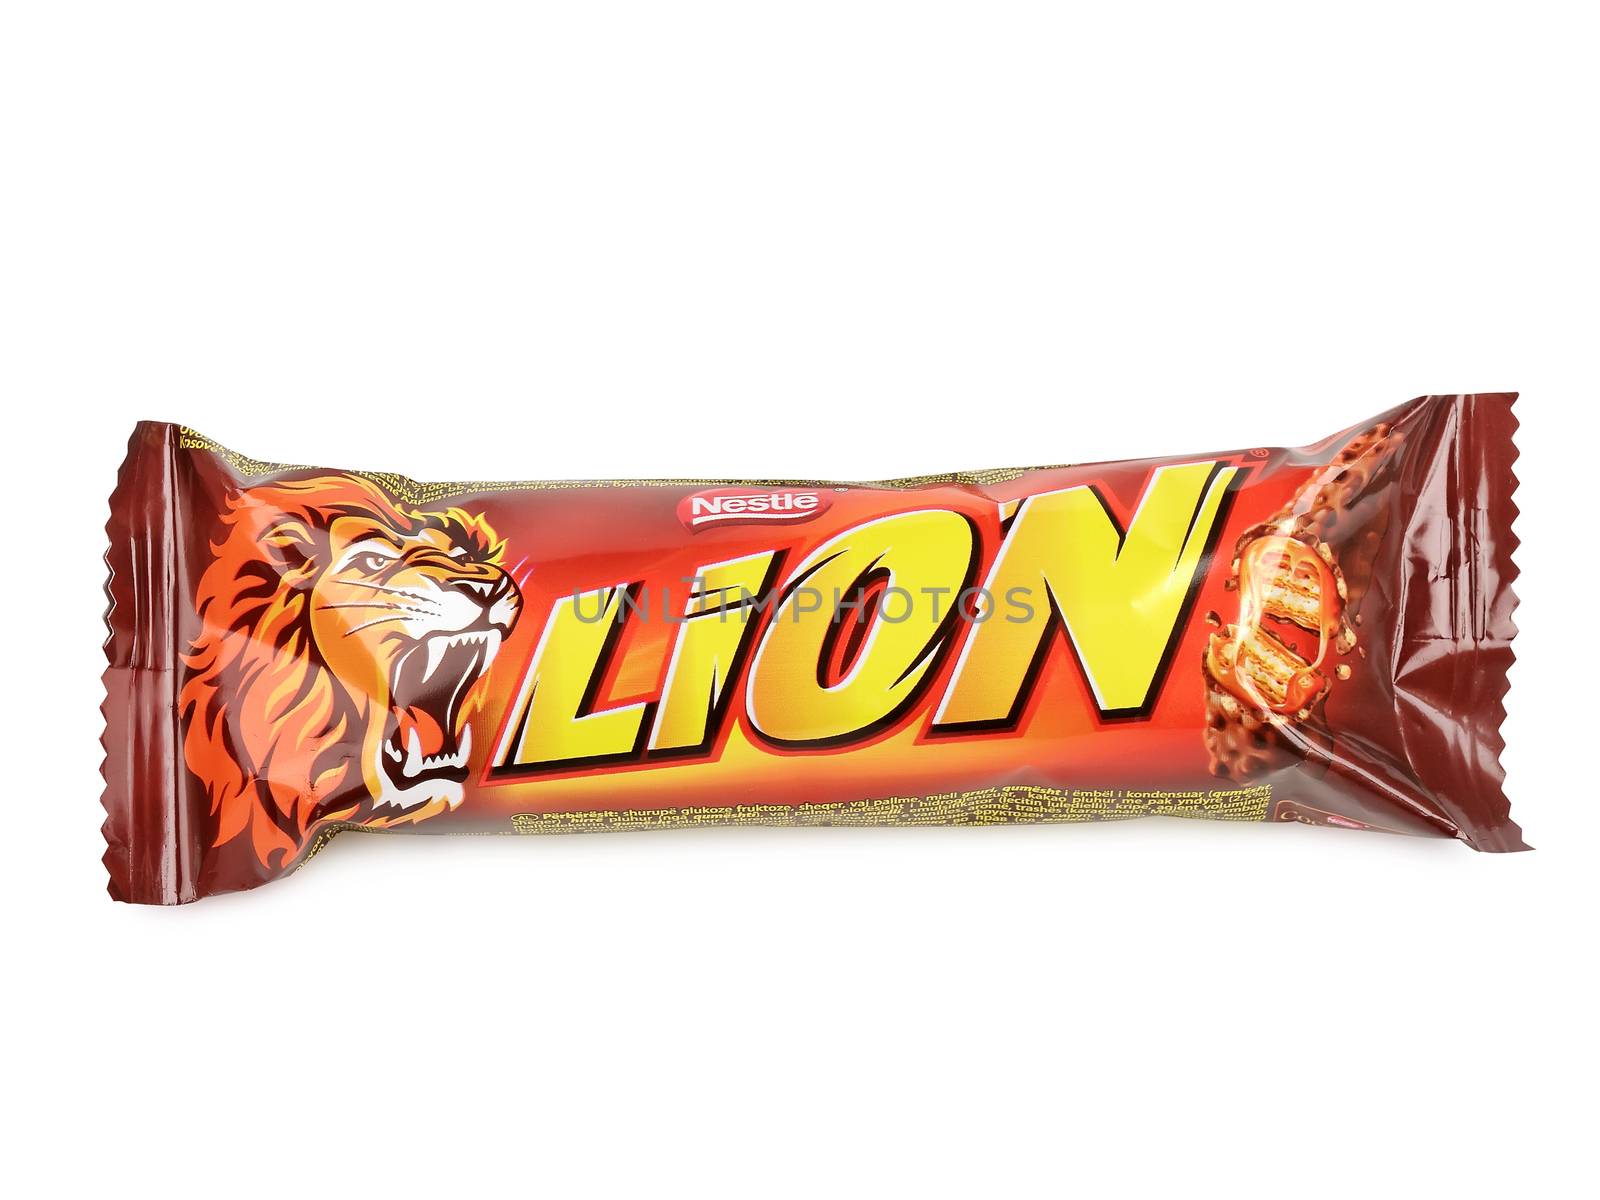 PULA, CROATIA - DECEMBER 5, 2015: Lion bar isolated on white. Lion is a chocolate bar confection that is manufactured by Nestle